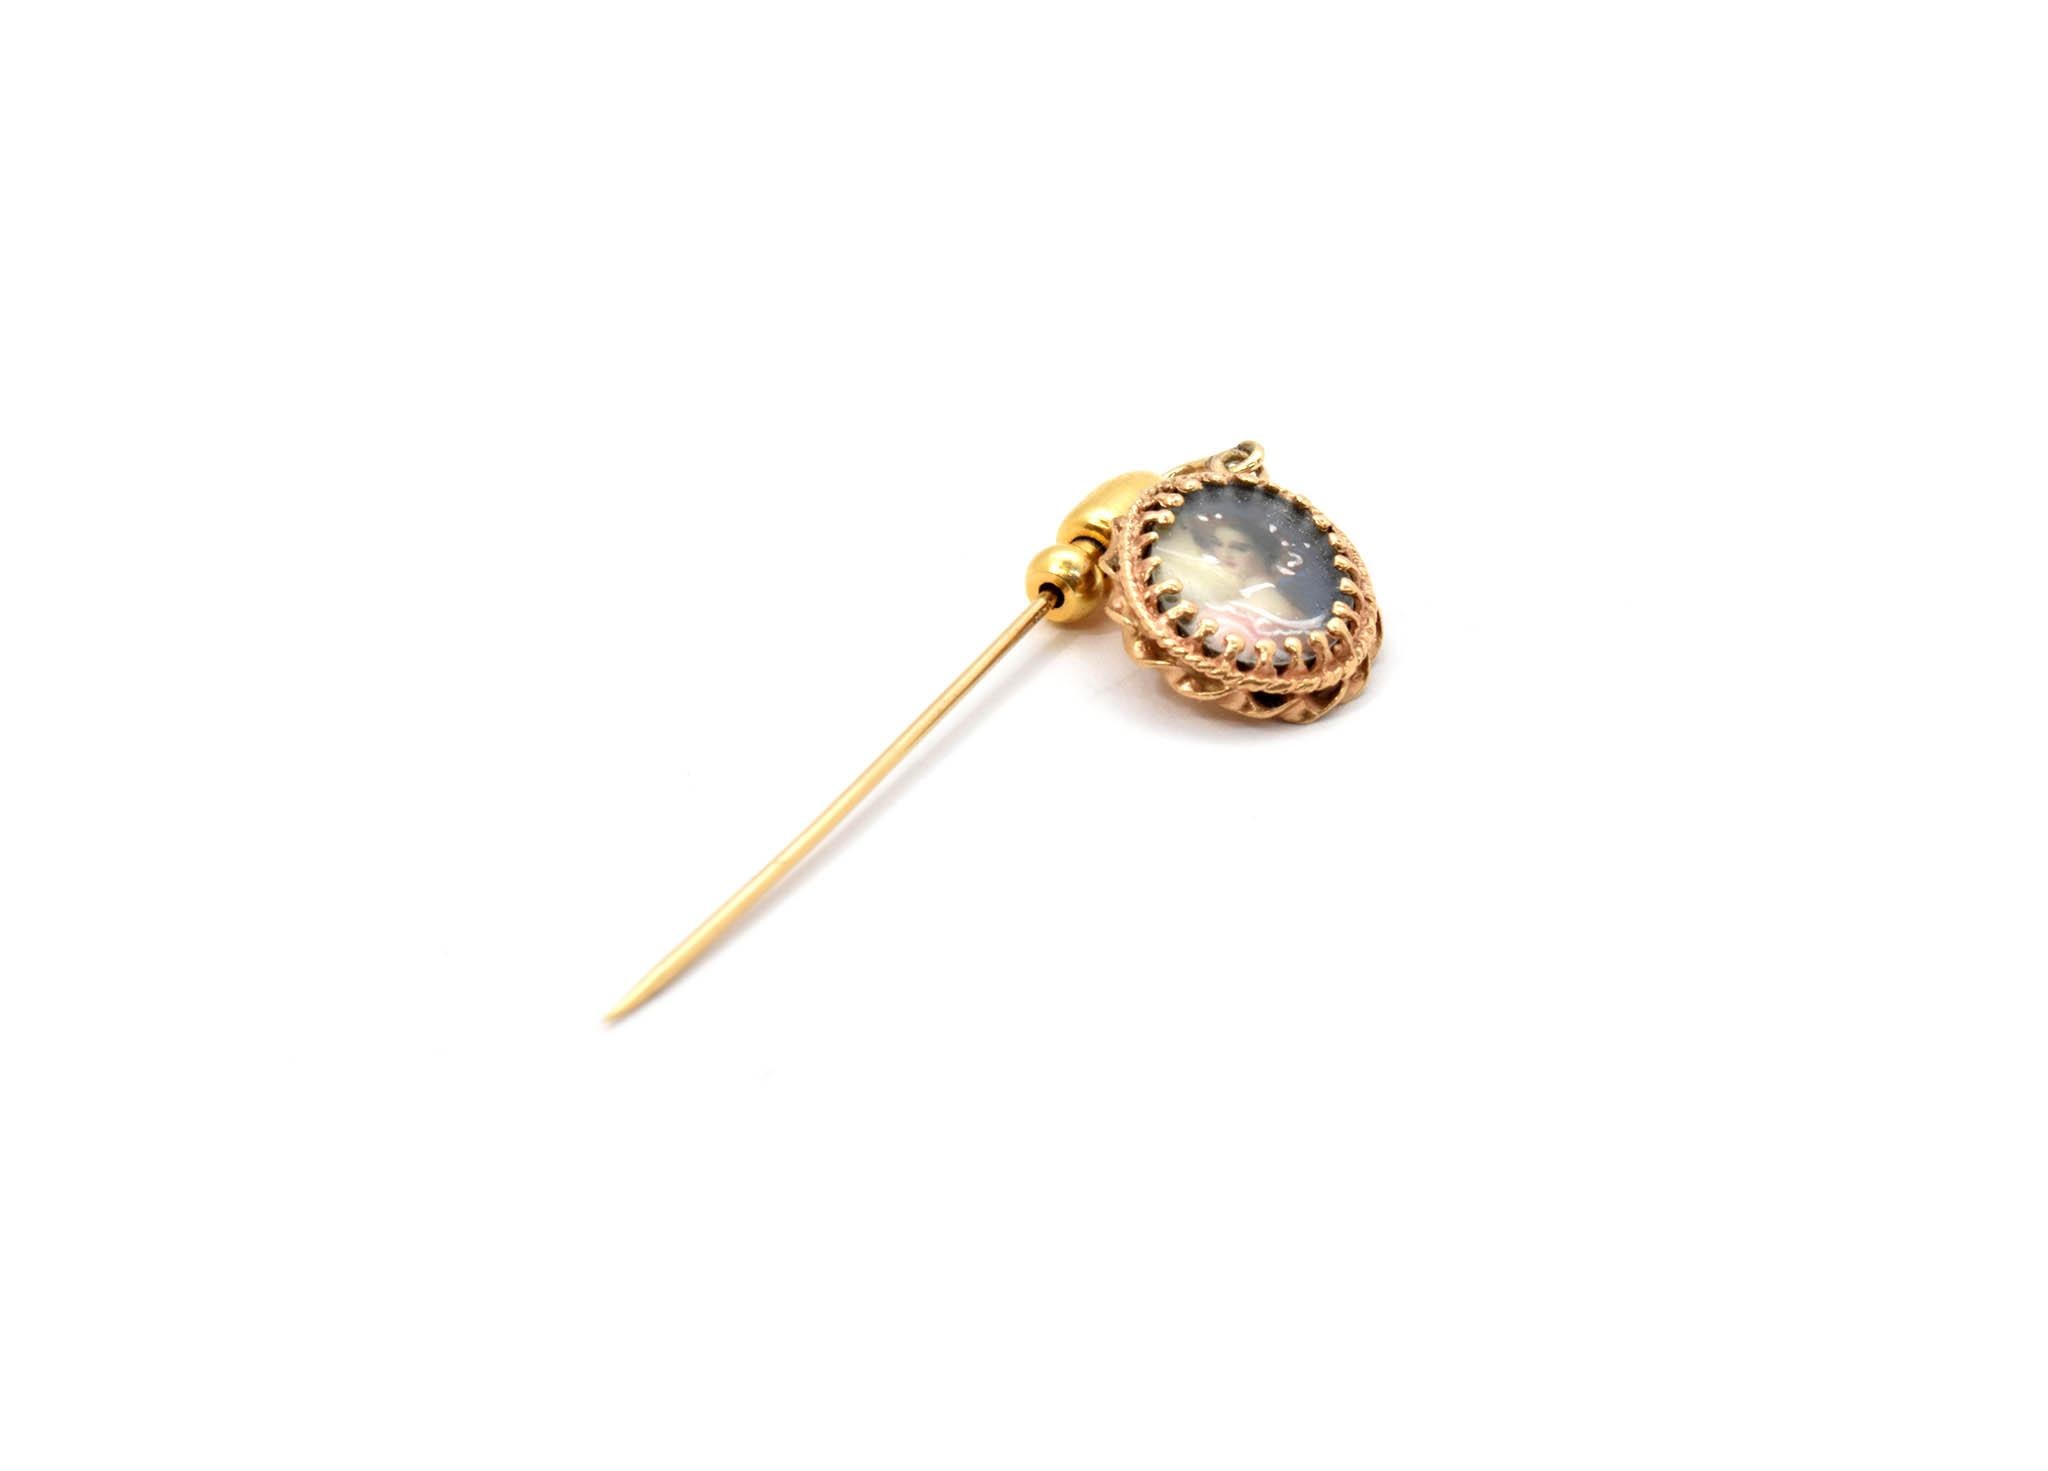 This vintage pin is made in 14k yellow gold. It has an oval cameo dangling from the end of it. The cameo is in color, and it is protected by a piece of glass. The pin measures 67x14mm, and it weighs 3.0 grams. 